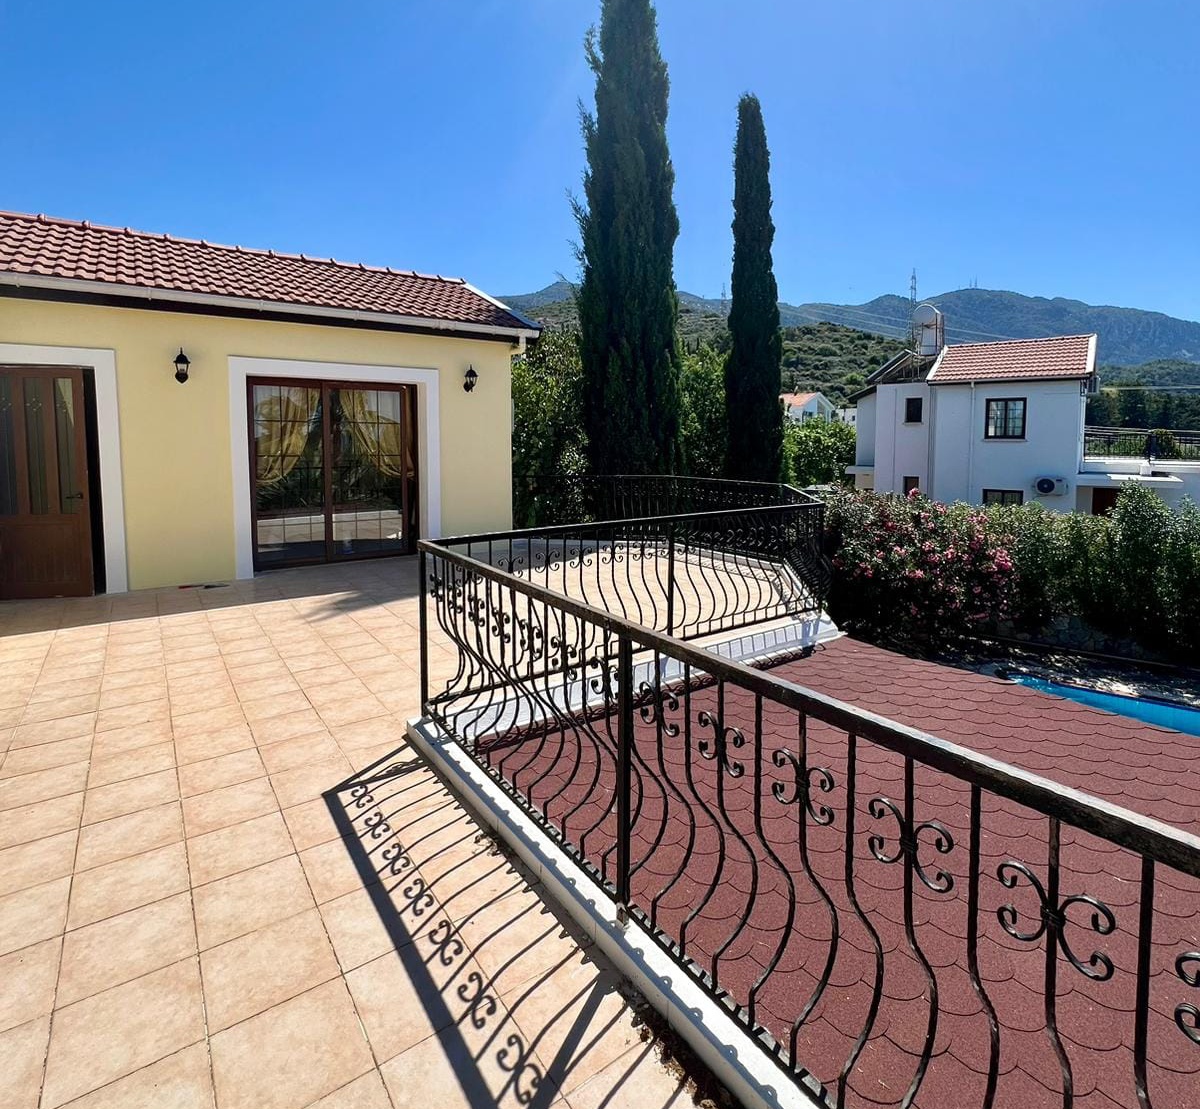 Villa in 4 apartments in three locations, offering panoramic views!